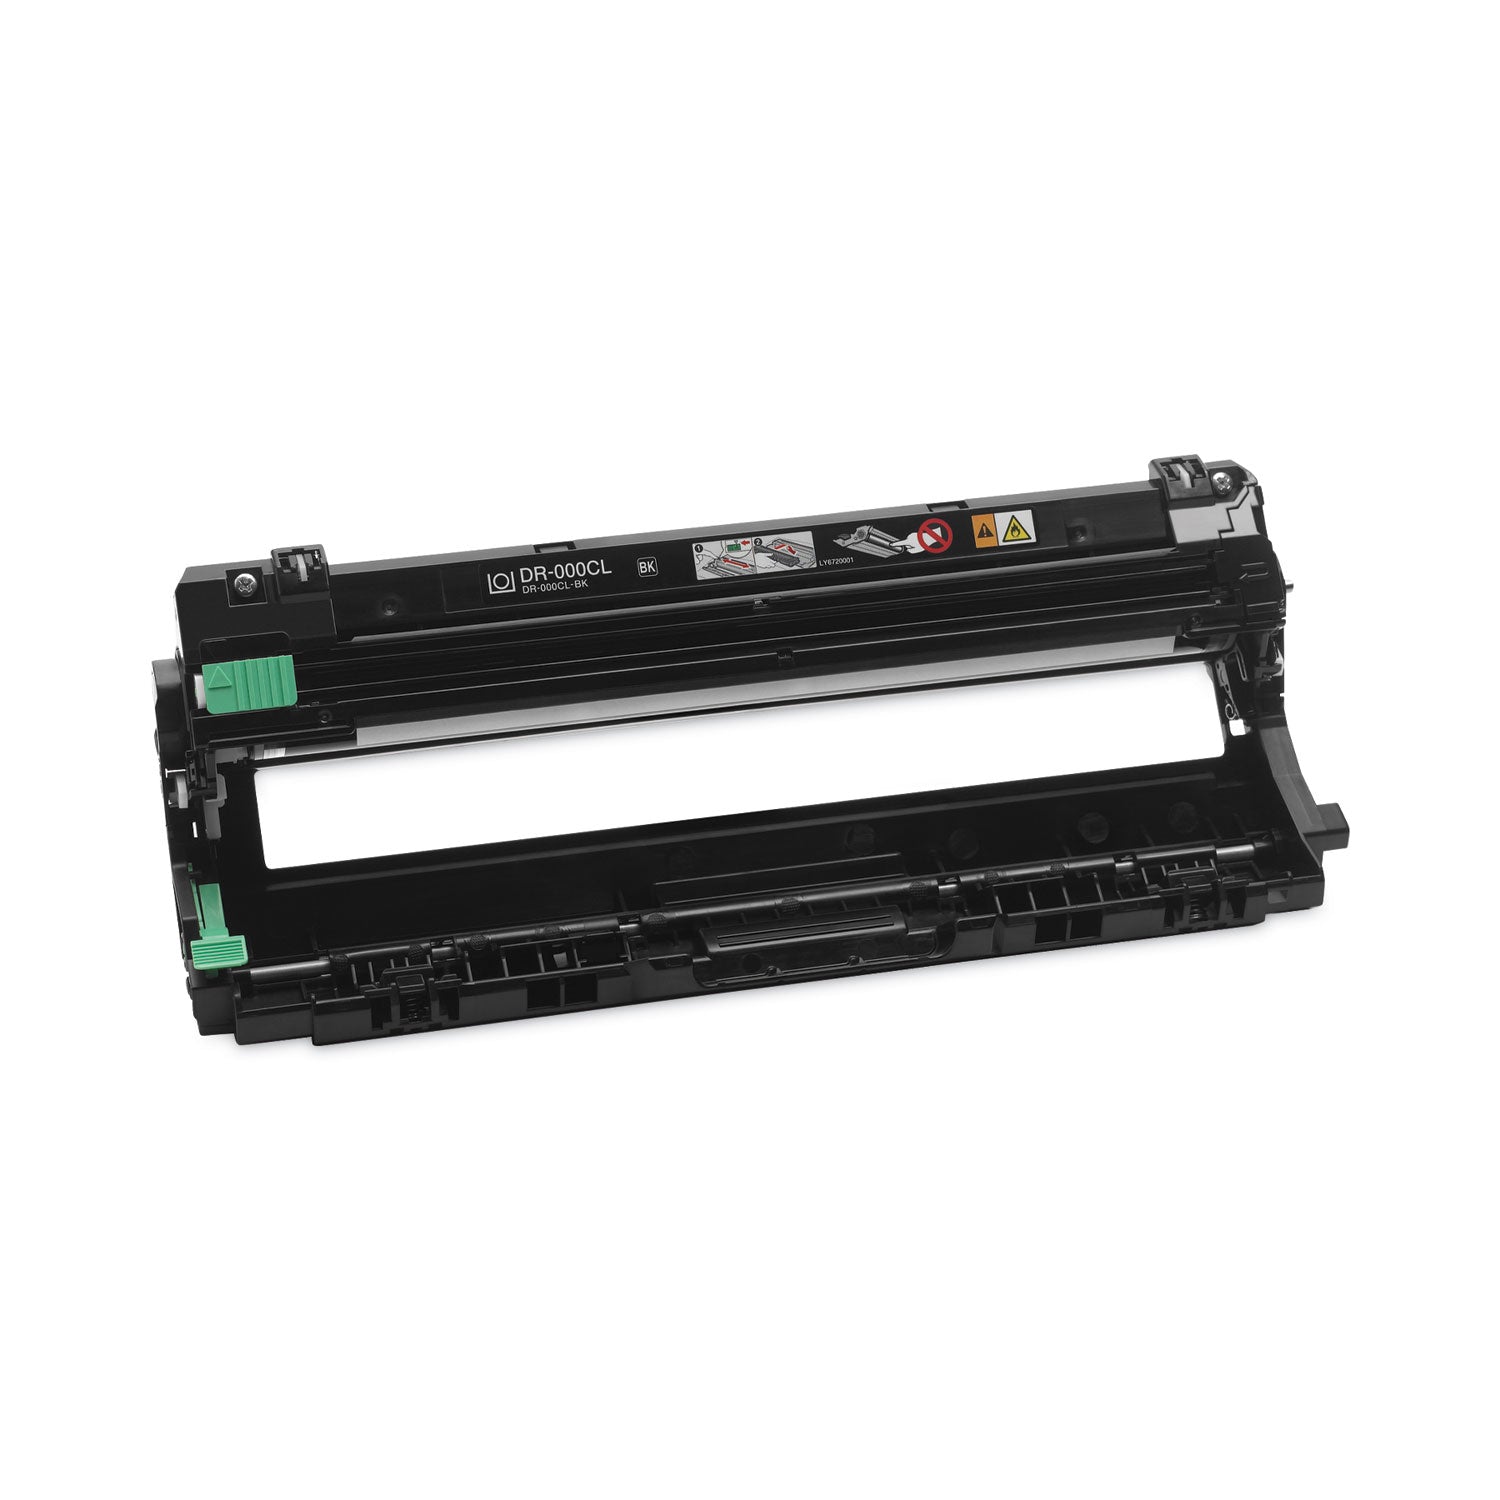 dr221cl-drum-unit-15000-page-yield-black-cyan-magenta-yellow_brtdr221cl - 4